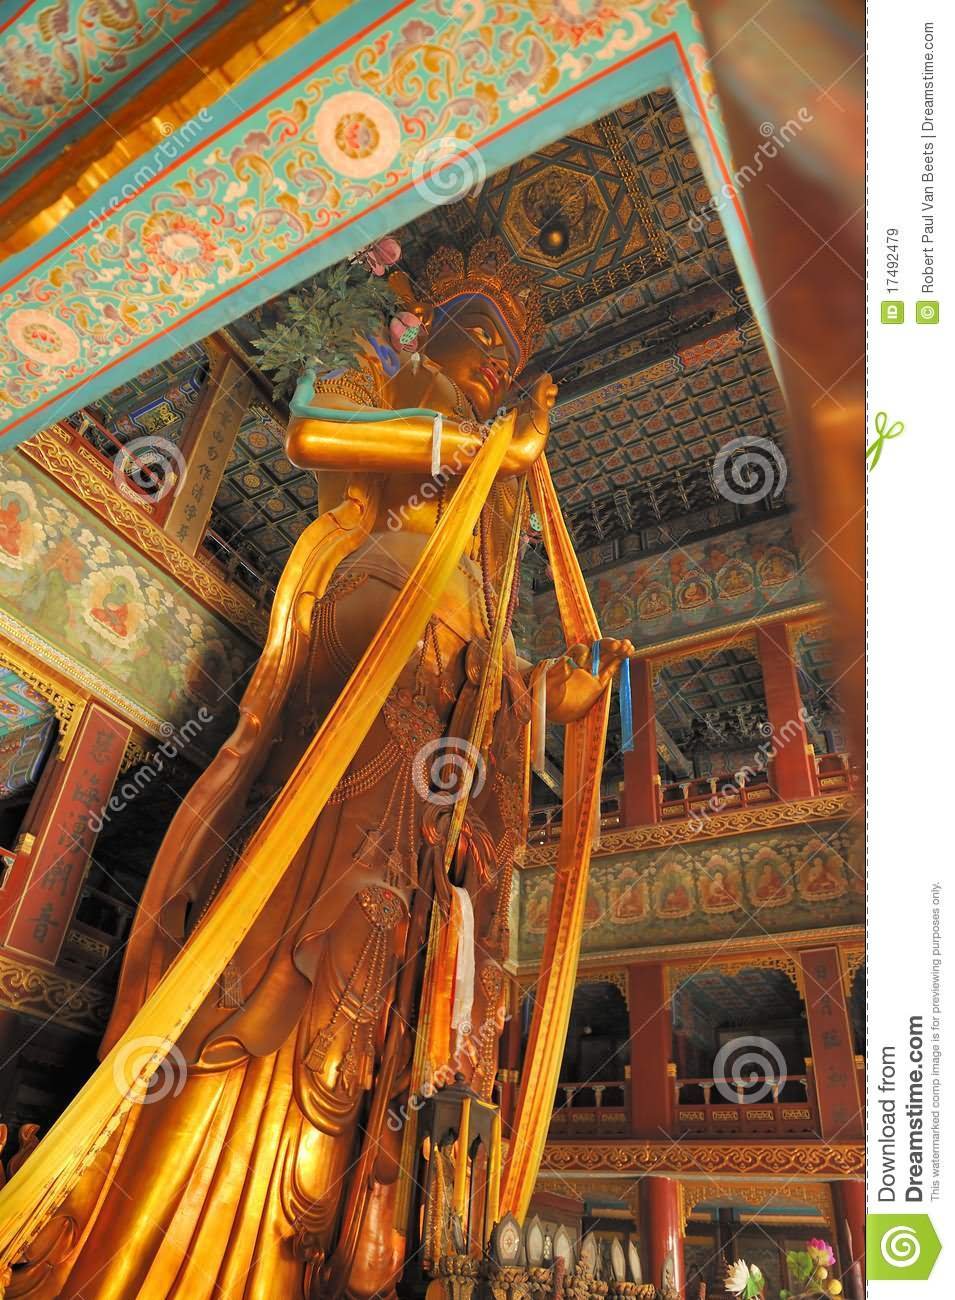 Huge Lord Buddha Statue Inside The Yonghe Temple, Beijing